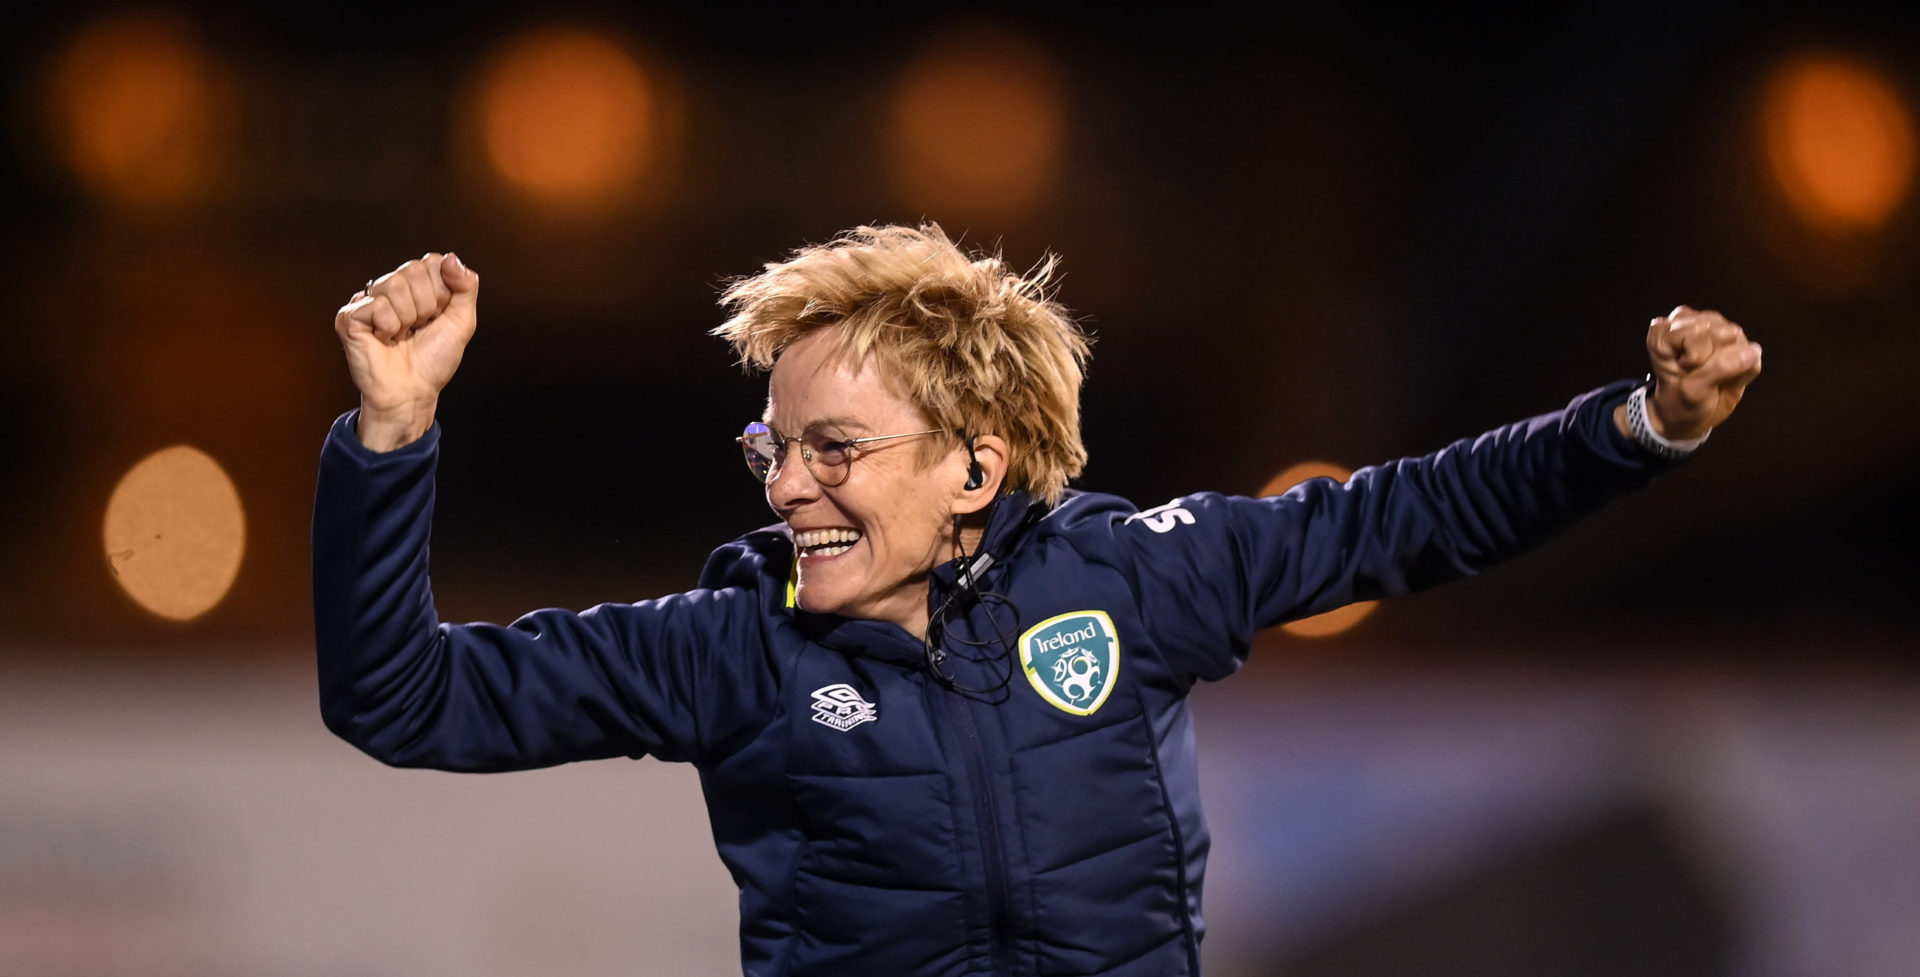 Republic of Ireland manager Vera Pauw celebrates at the final whistle of the FIFA Women's World Cup 2023 qualifier match between Republic of Ireland and Finland at Tallaght Stadium in Dublin, 01-09-2022. Image: Stephen McCarthy/Sportsfile